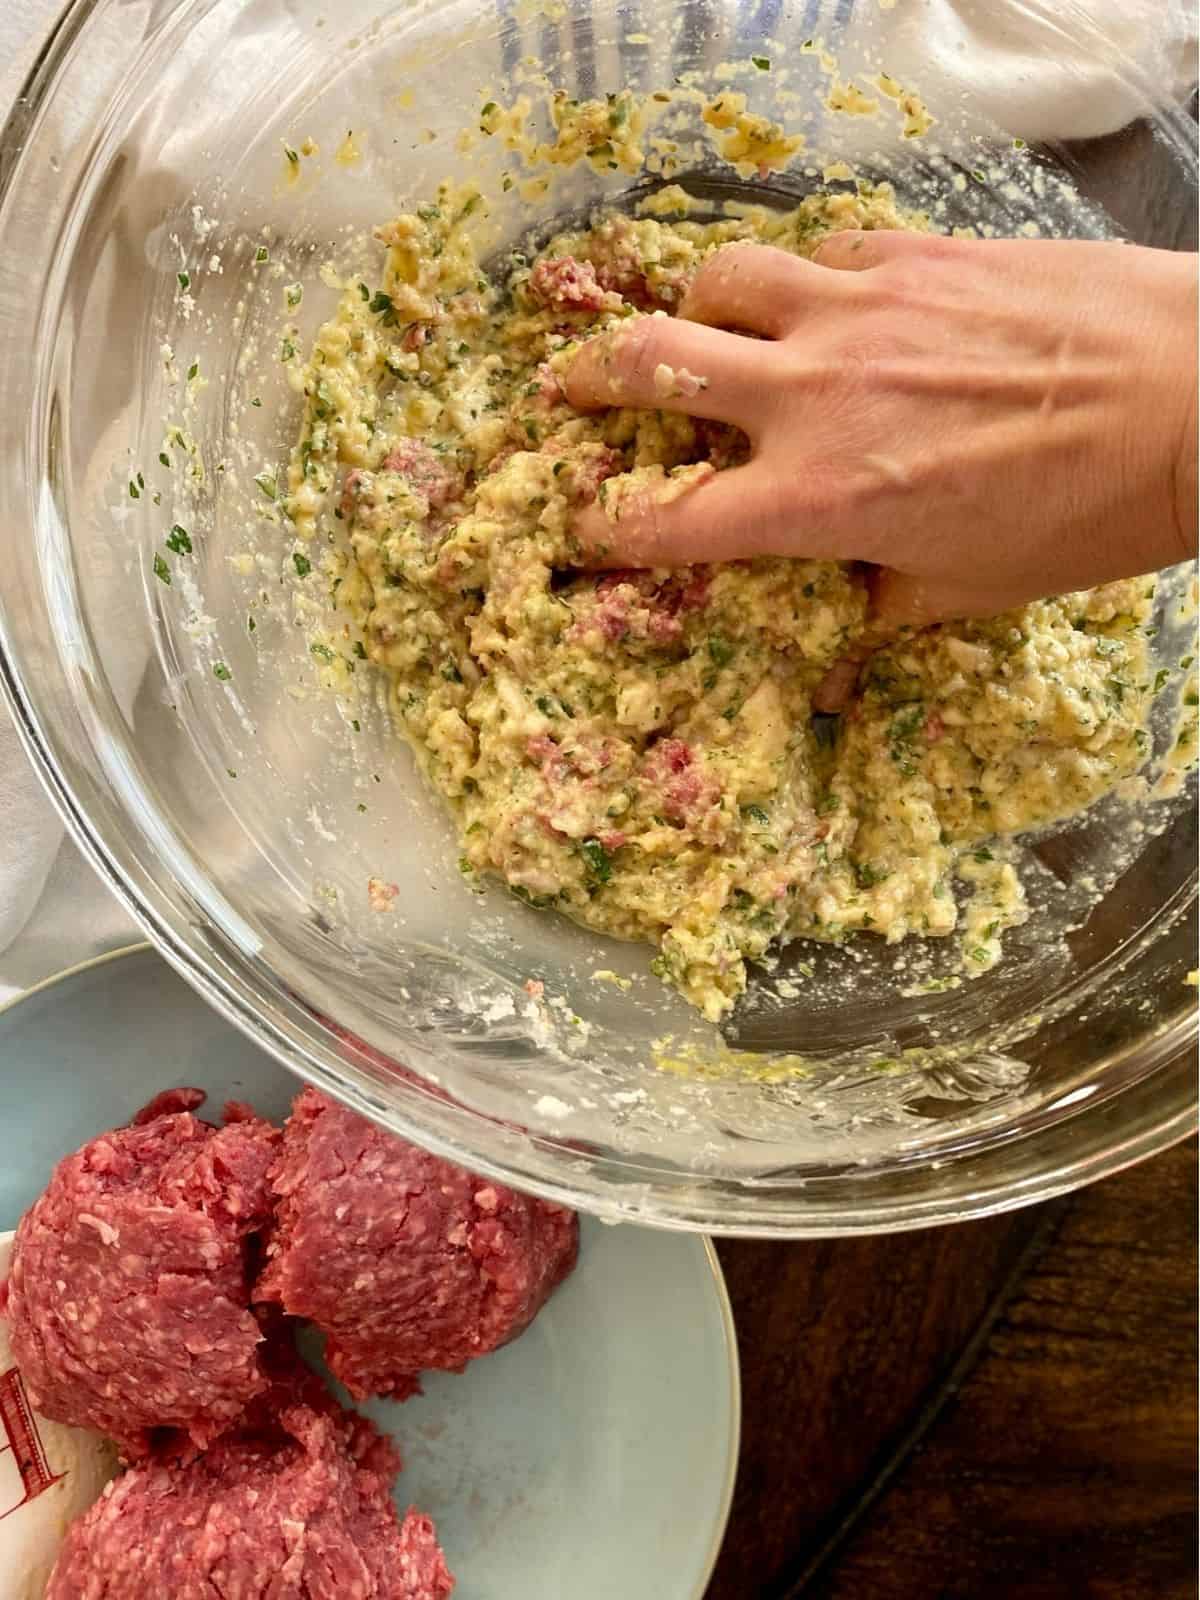 hand mixing meatball ingredients in glass bowl next to plate of ground beef